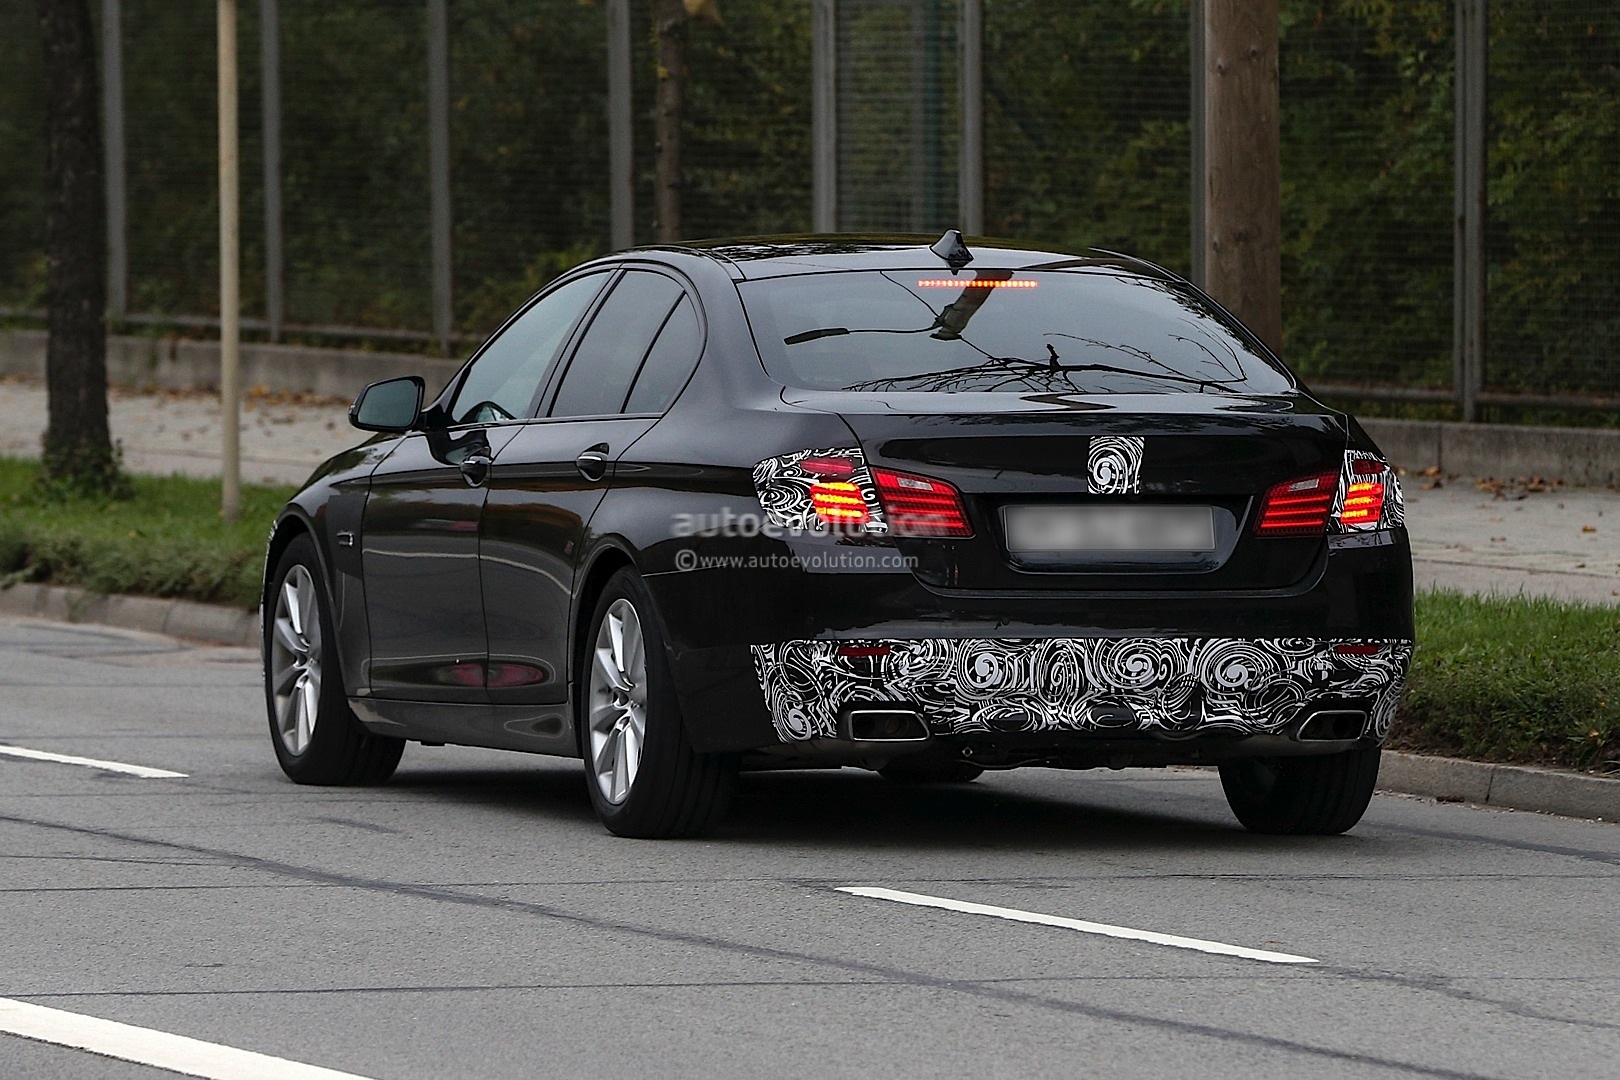 F10 BMW 5 Series facelift